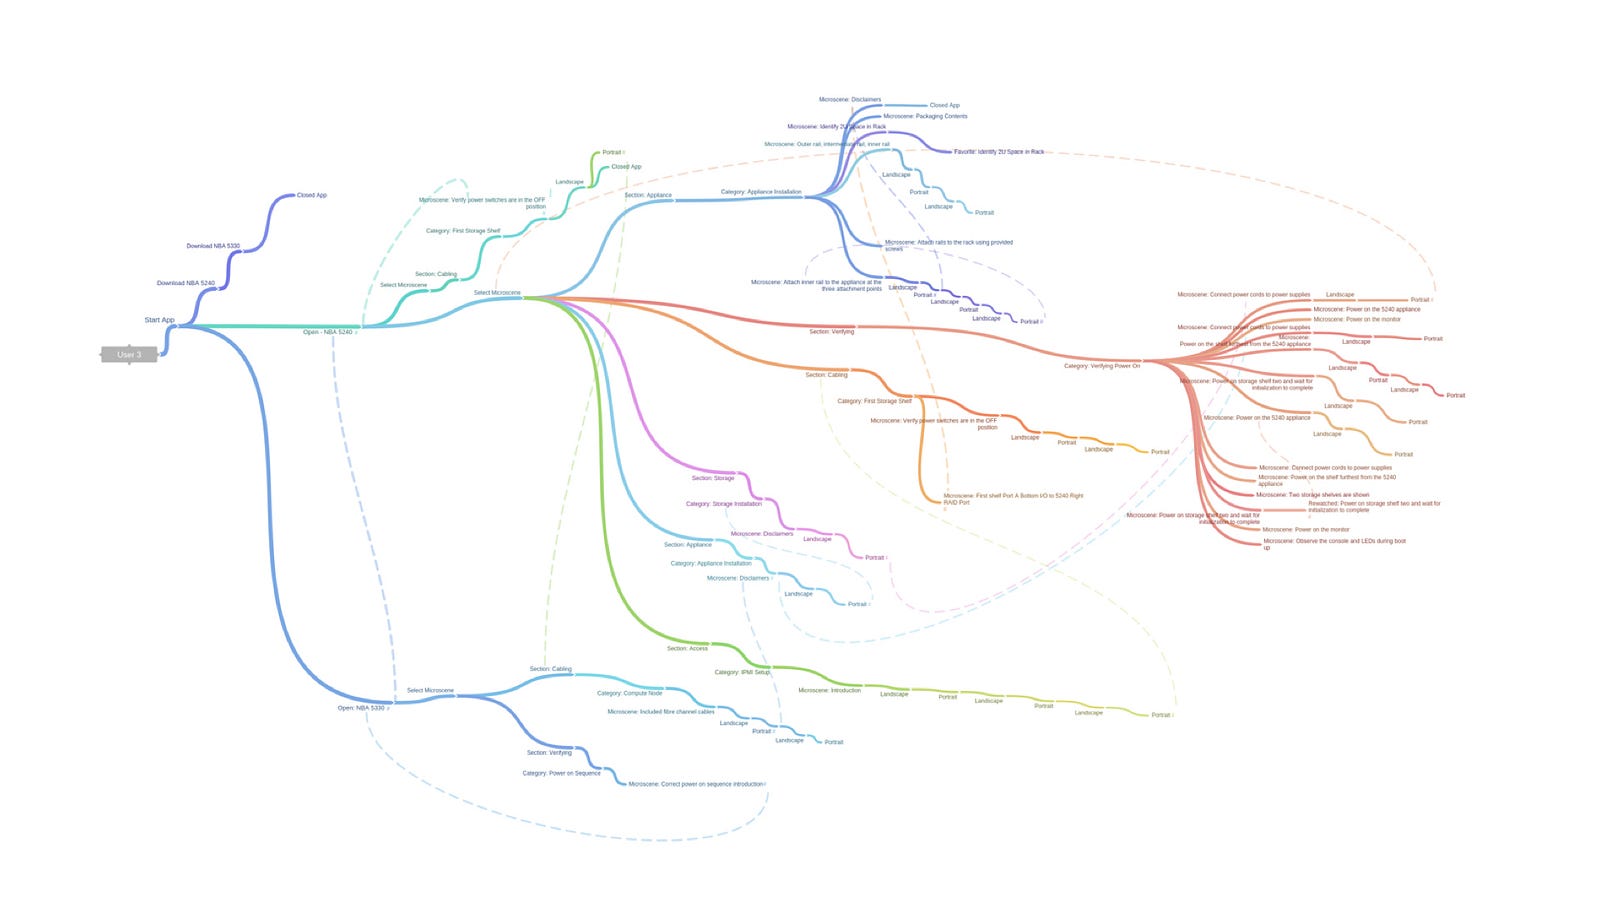 One user’s 62 minute workflows on AppAssist, created by Jennifer Teves in form of a branching tree diagram.